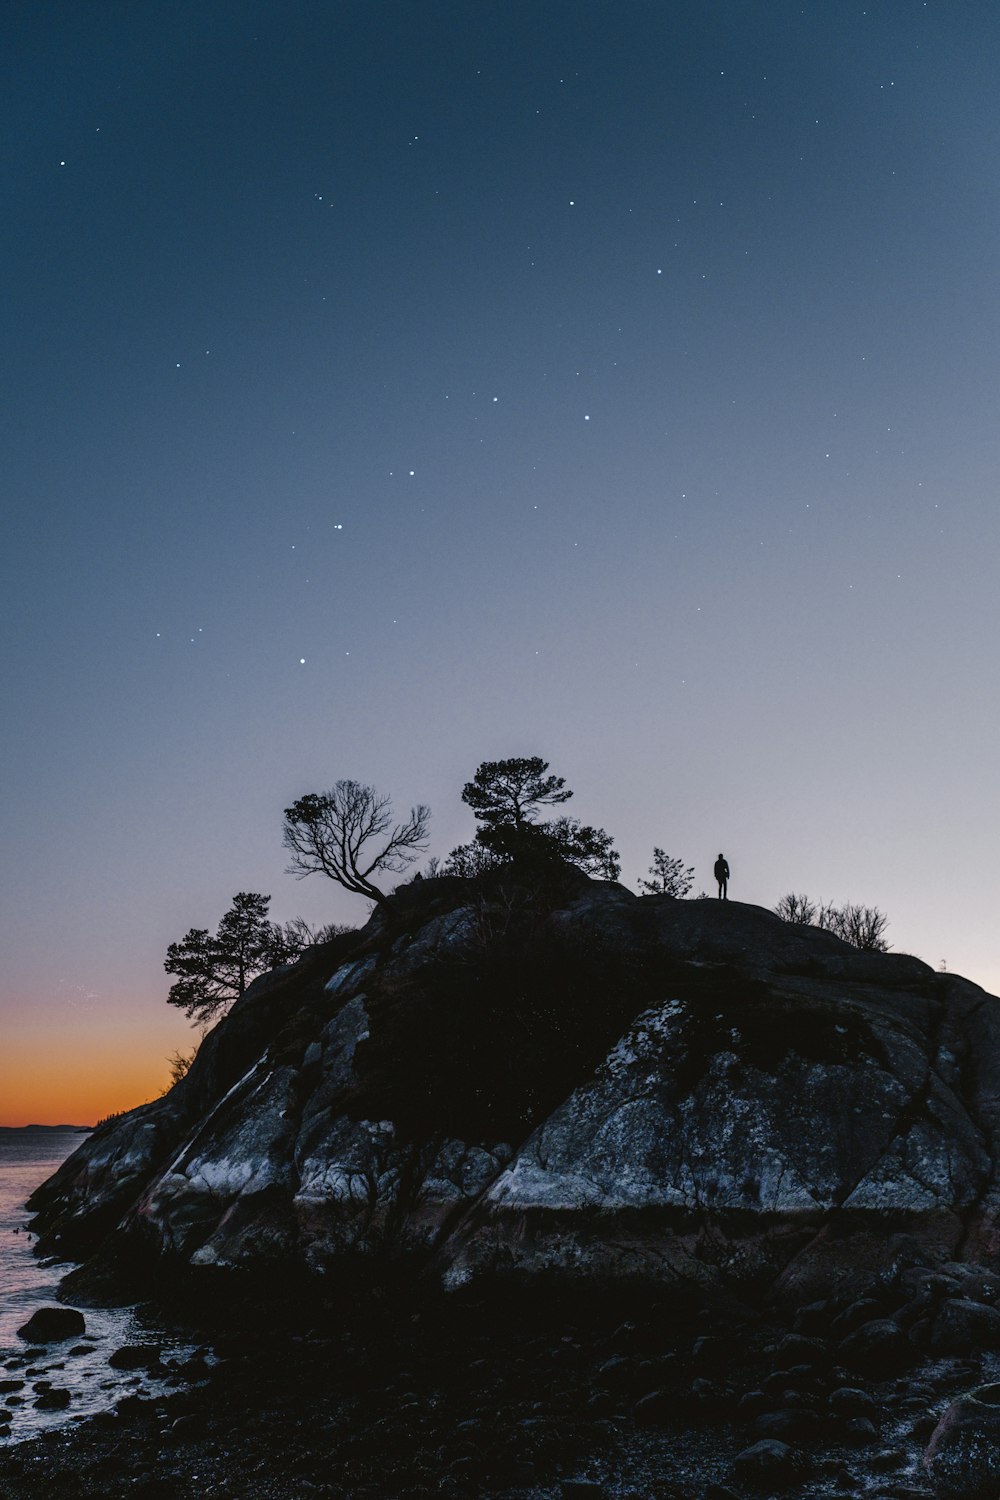 silhouette of 2 people standing on rock formation during night time